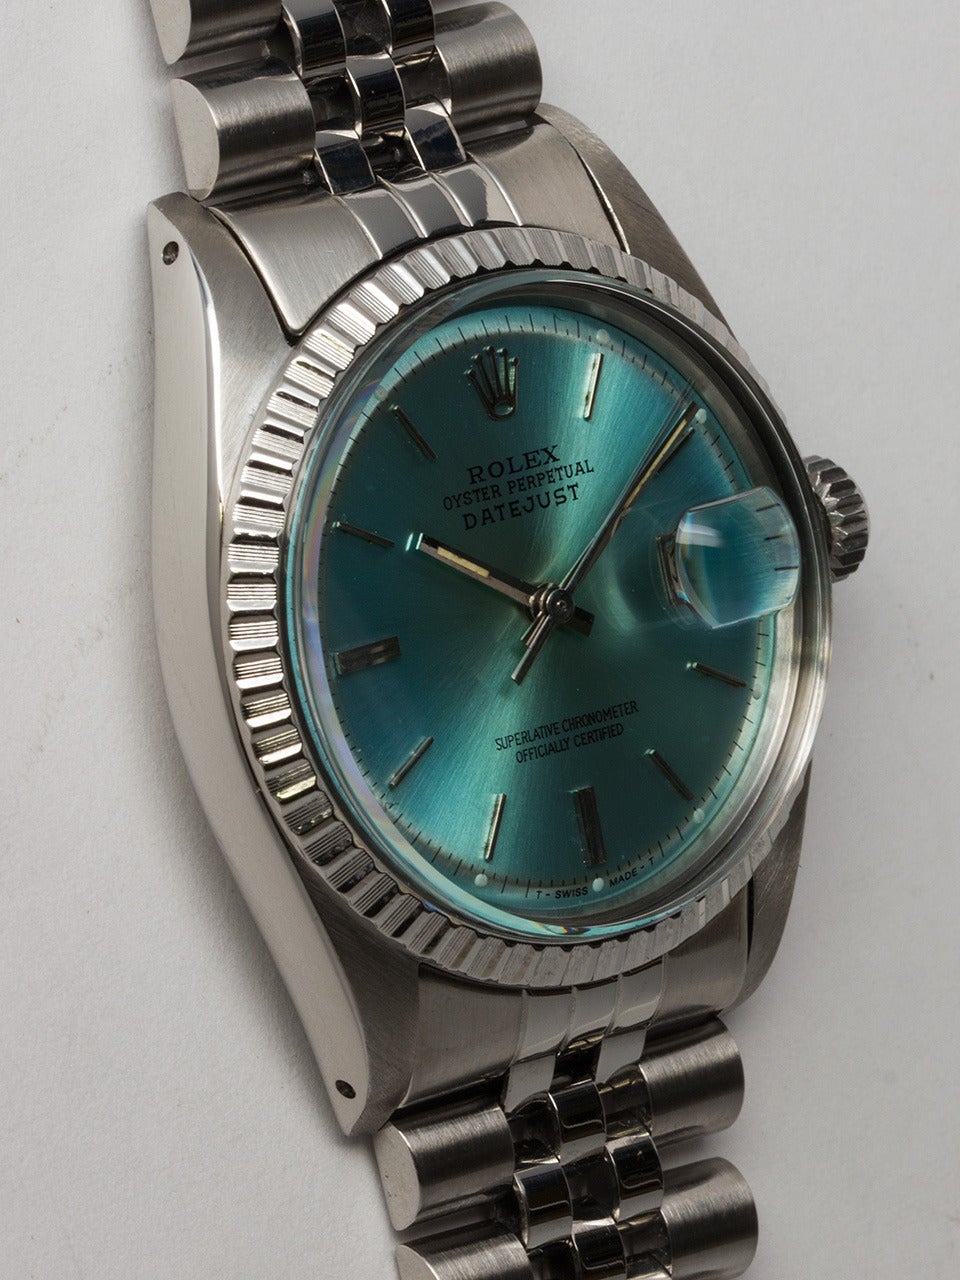 Rolex Stainless Steel Datejust Wristwatch Ref 1603 serial# 5.3 million circa 1978. 36mm diameter case with fluted bezel and acrylic crystal. Cool custom colored 